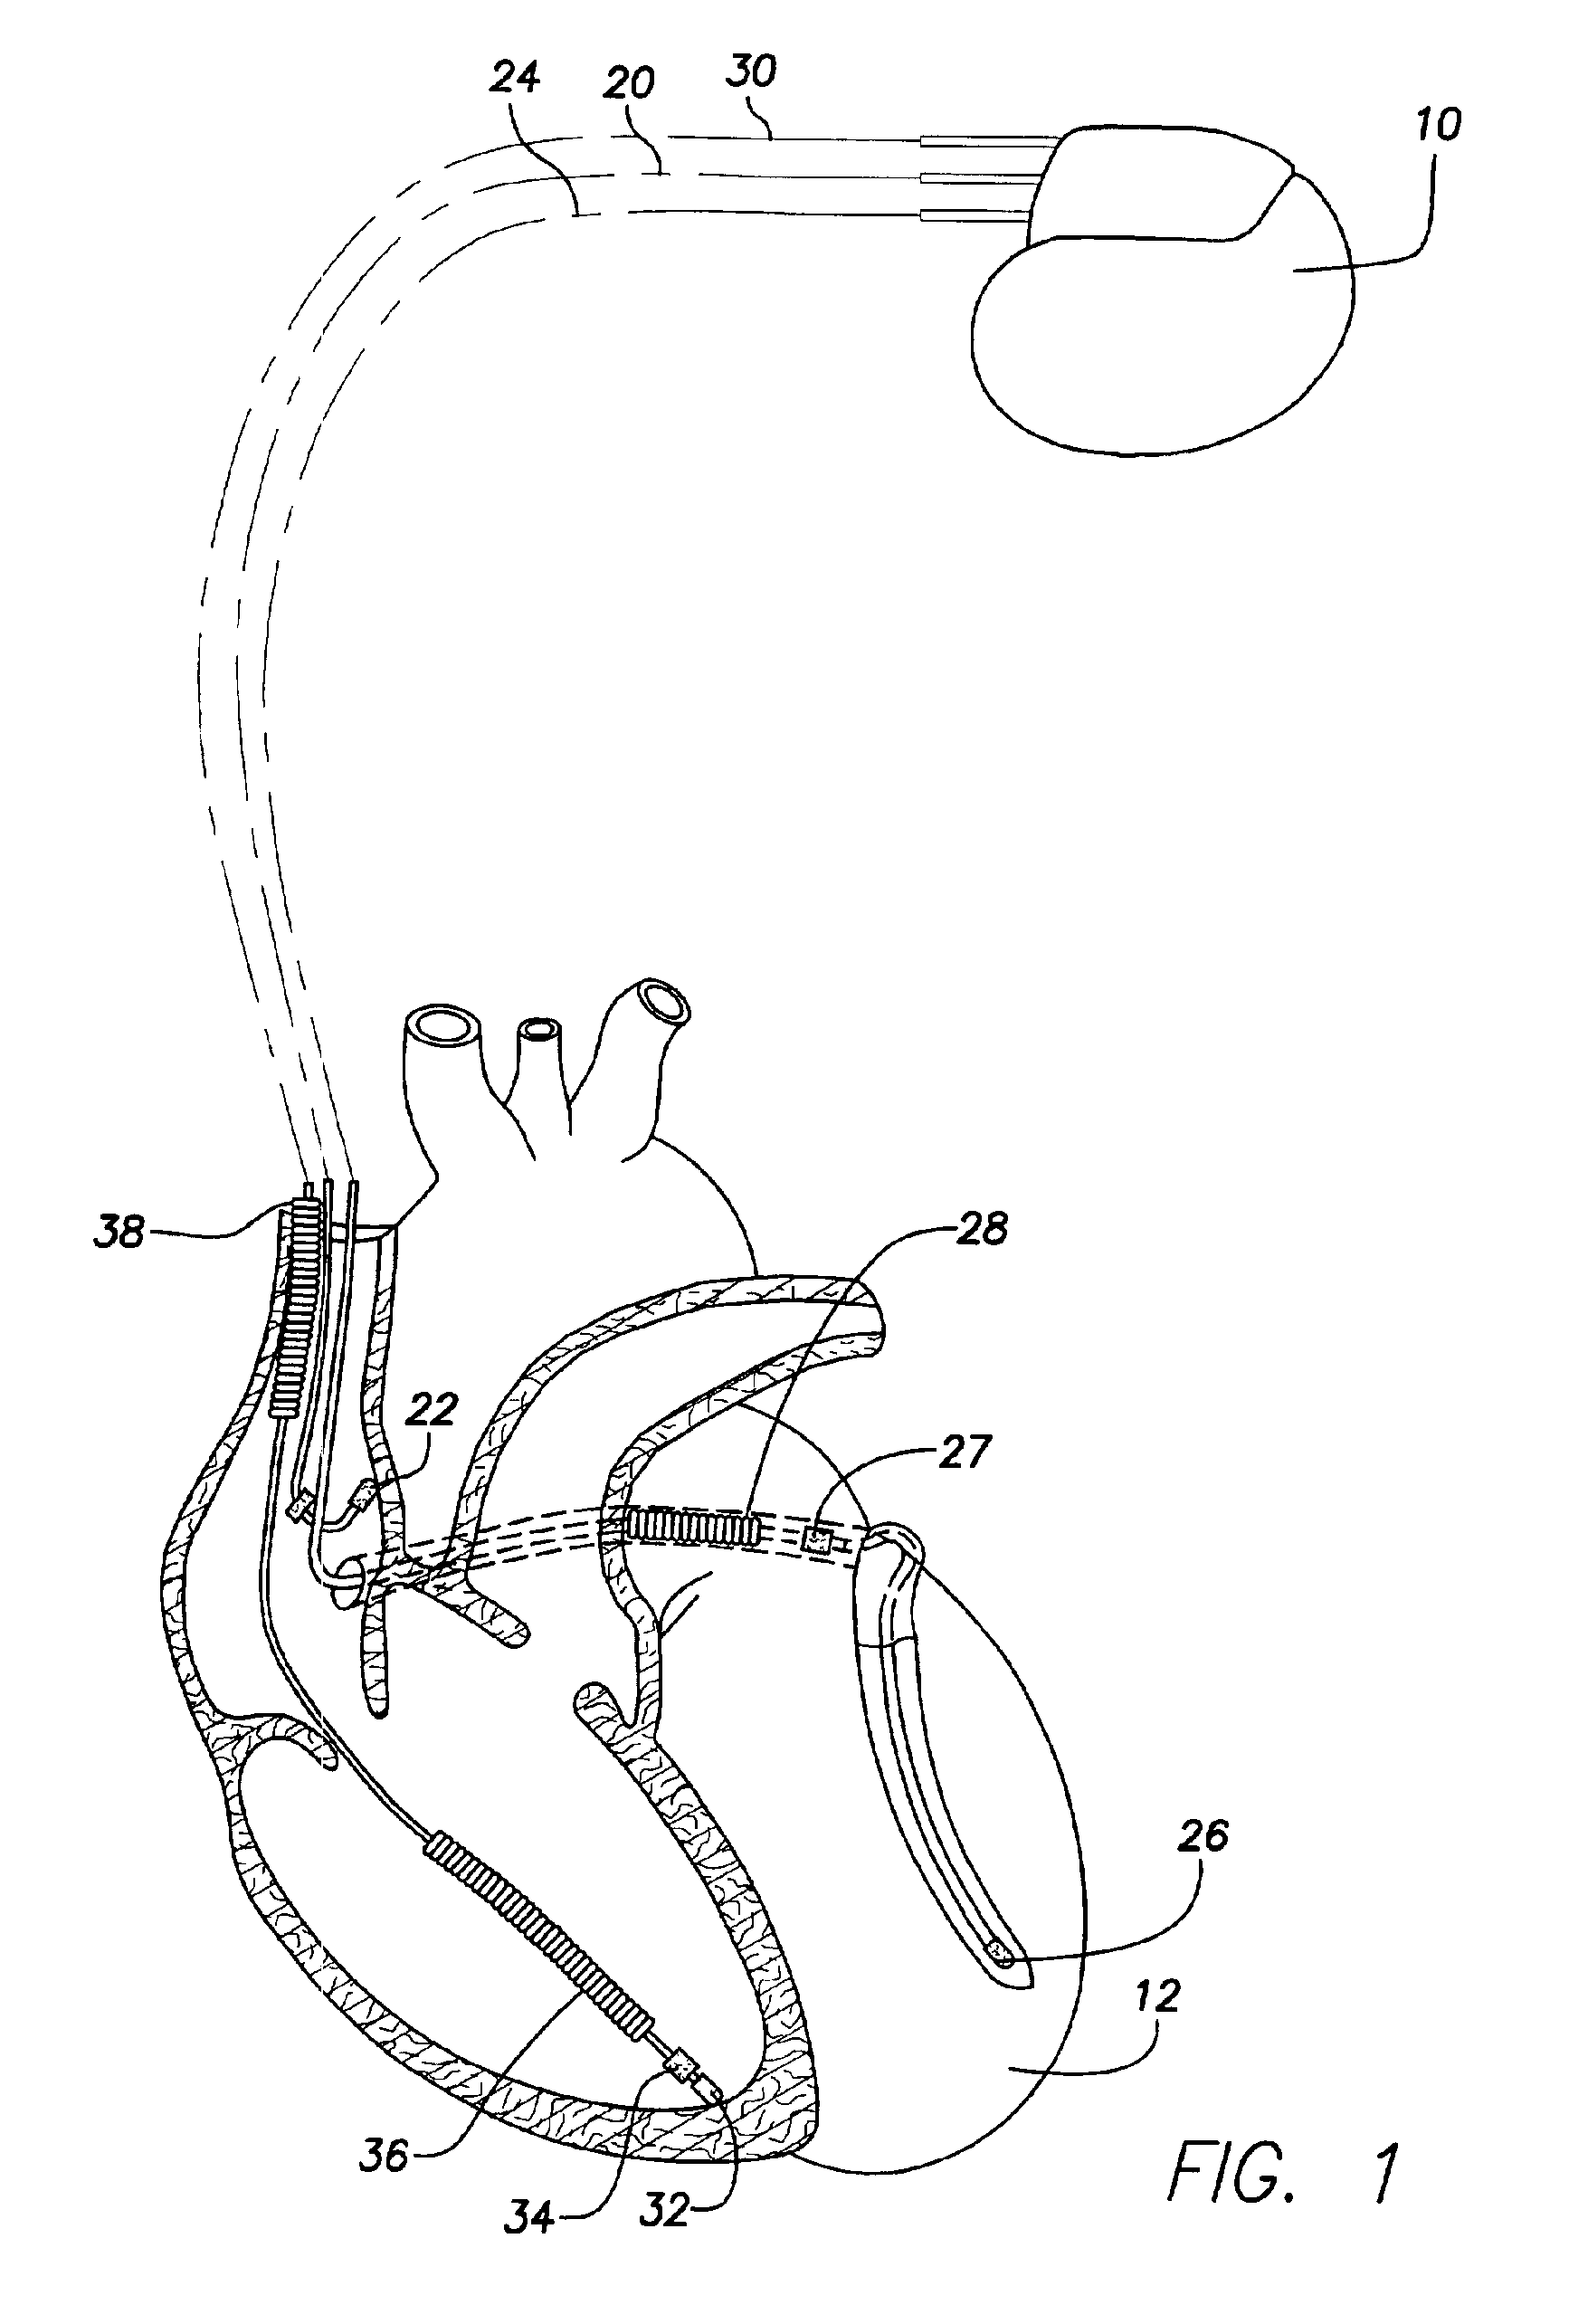 Implantable cardiac stimulation device that defibrillates the atria while avoiding the ventricular vulnerable period and method